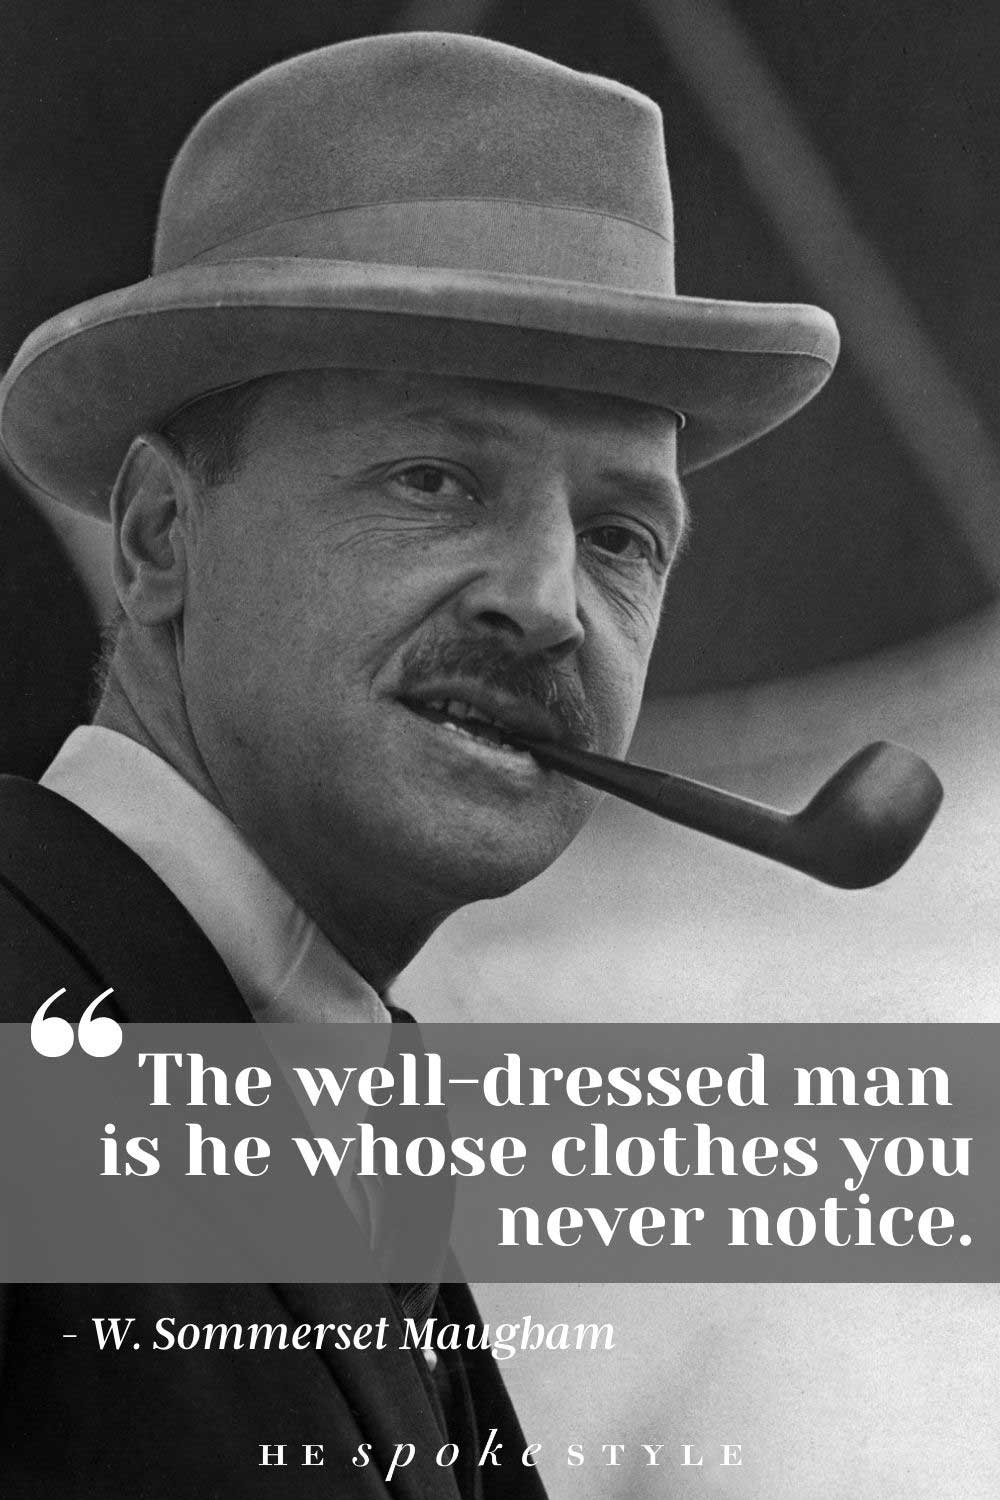 william sommerset maugham fashion quote